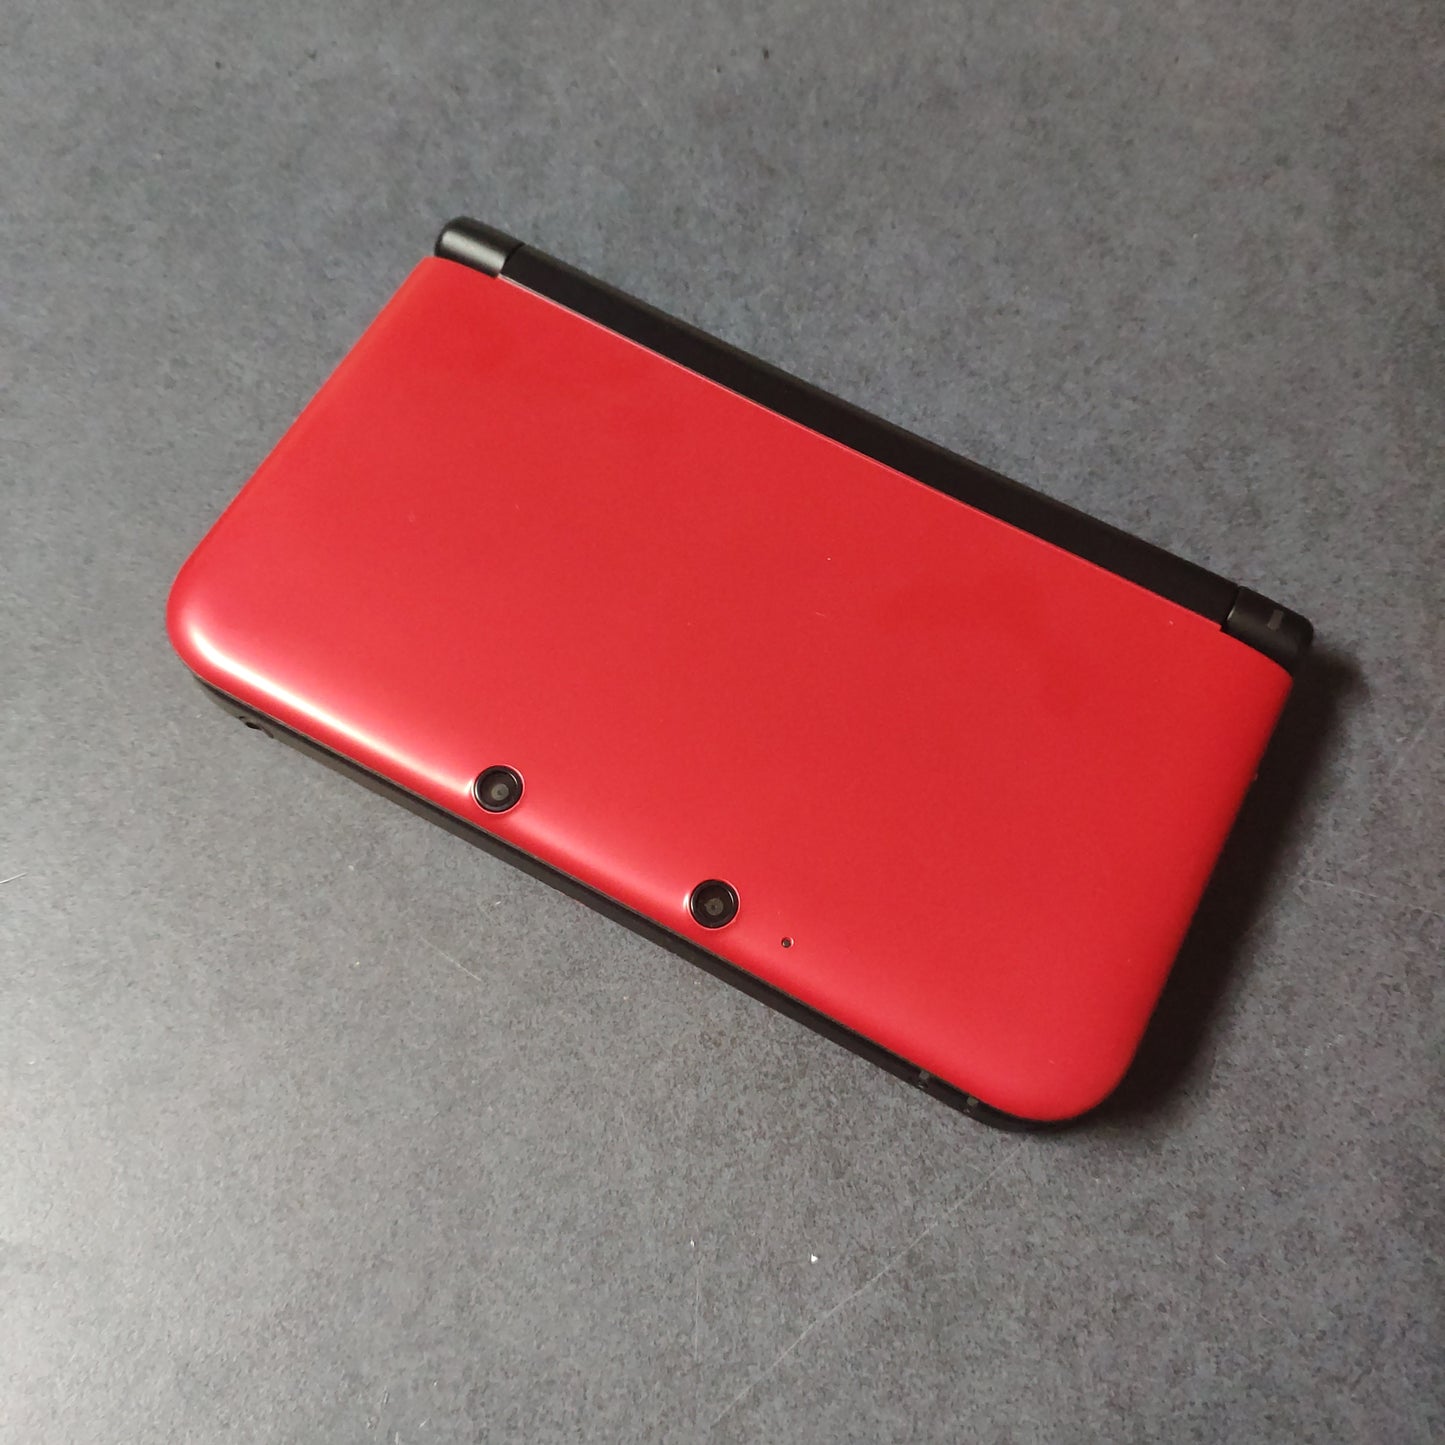 3ds Xl Rosso